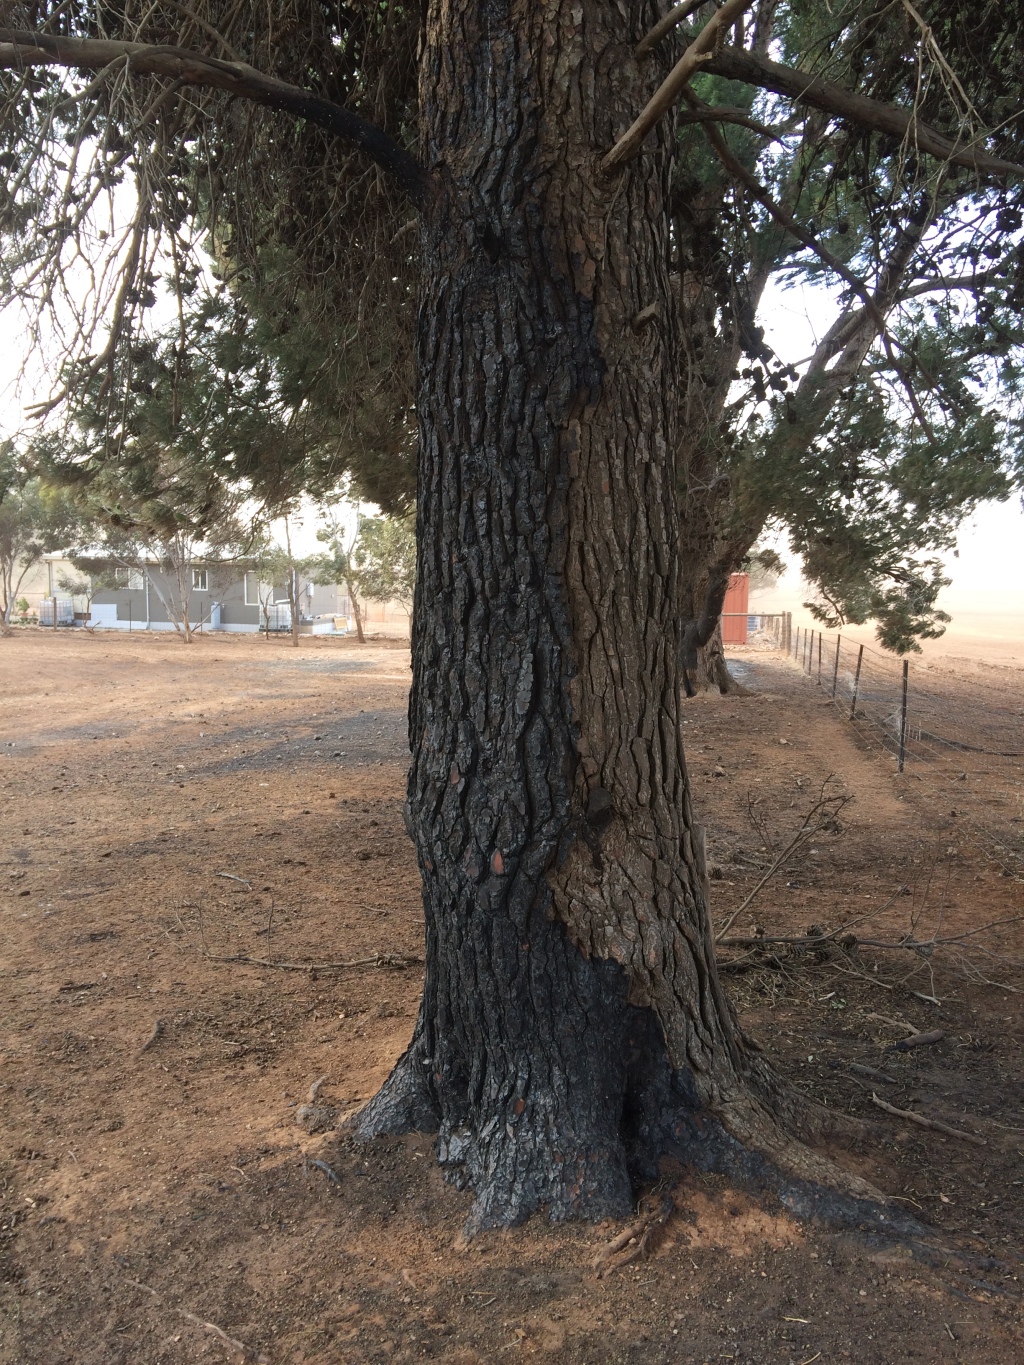 This is the tree I hid behind when the firestorm first came through. It's scorched a good 10 to 12 feet up, but the fire was snuffed out by wind, smoke, and dust. Thankfully.